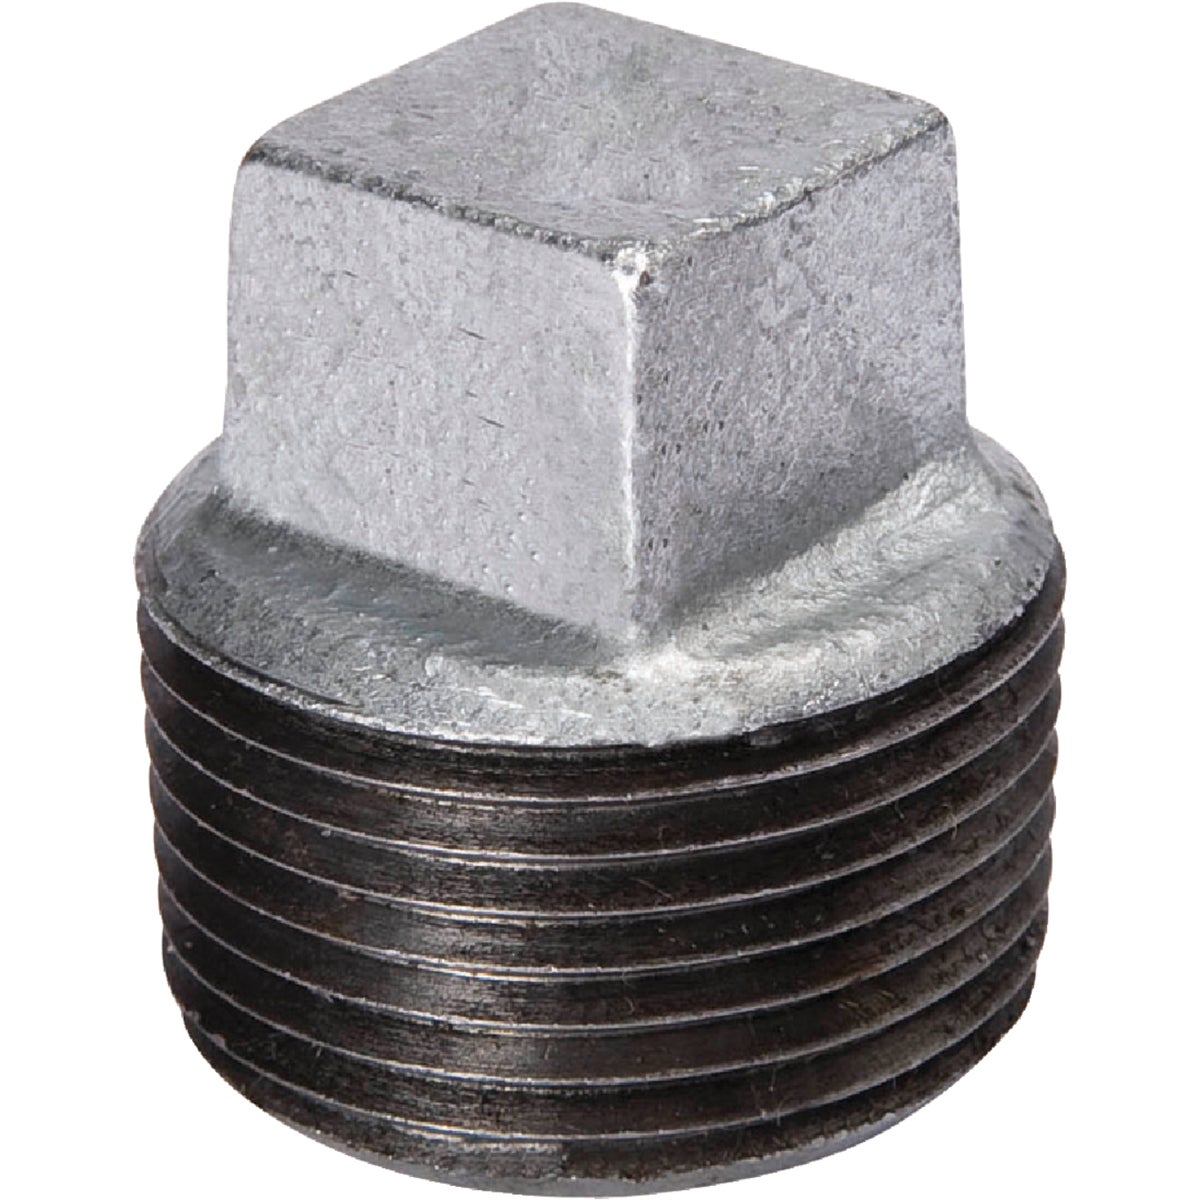 Southland 1 In. Malleable Iron Galvanized Plug